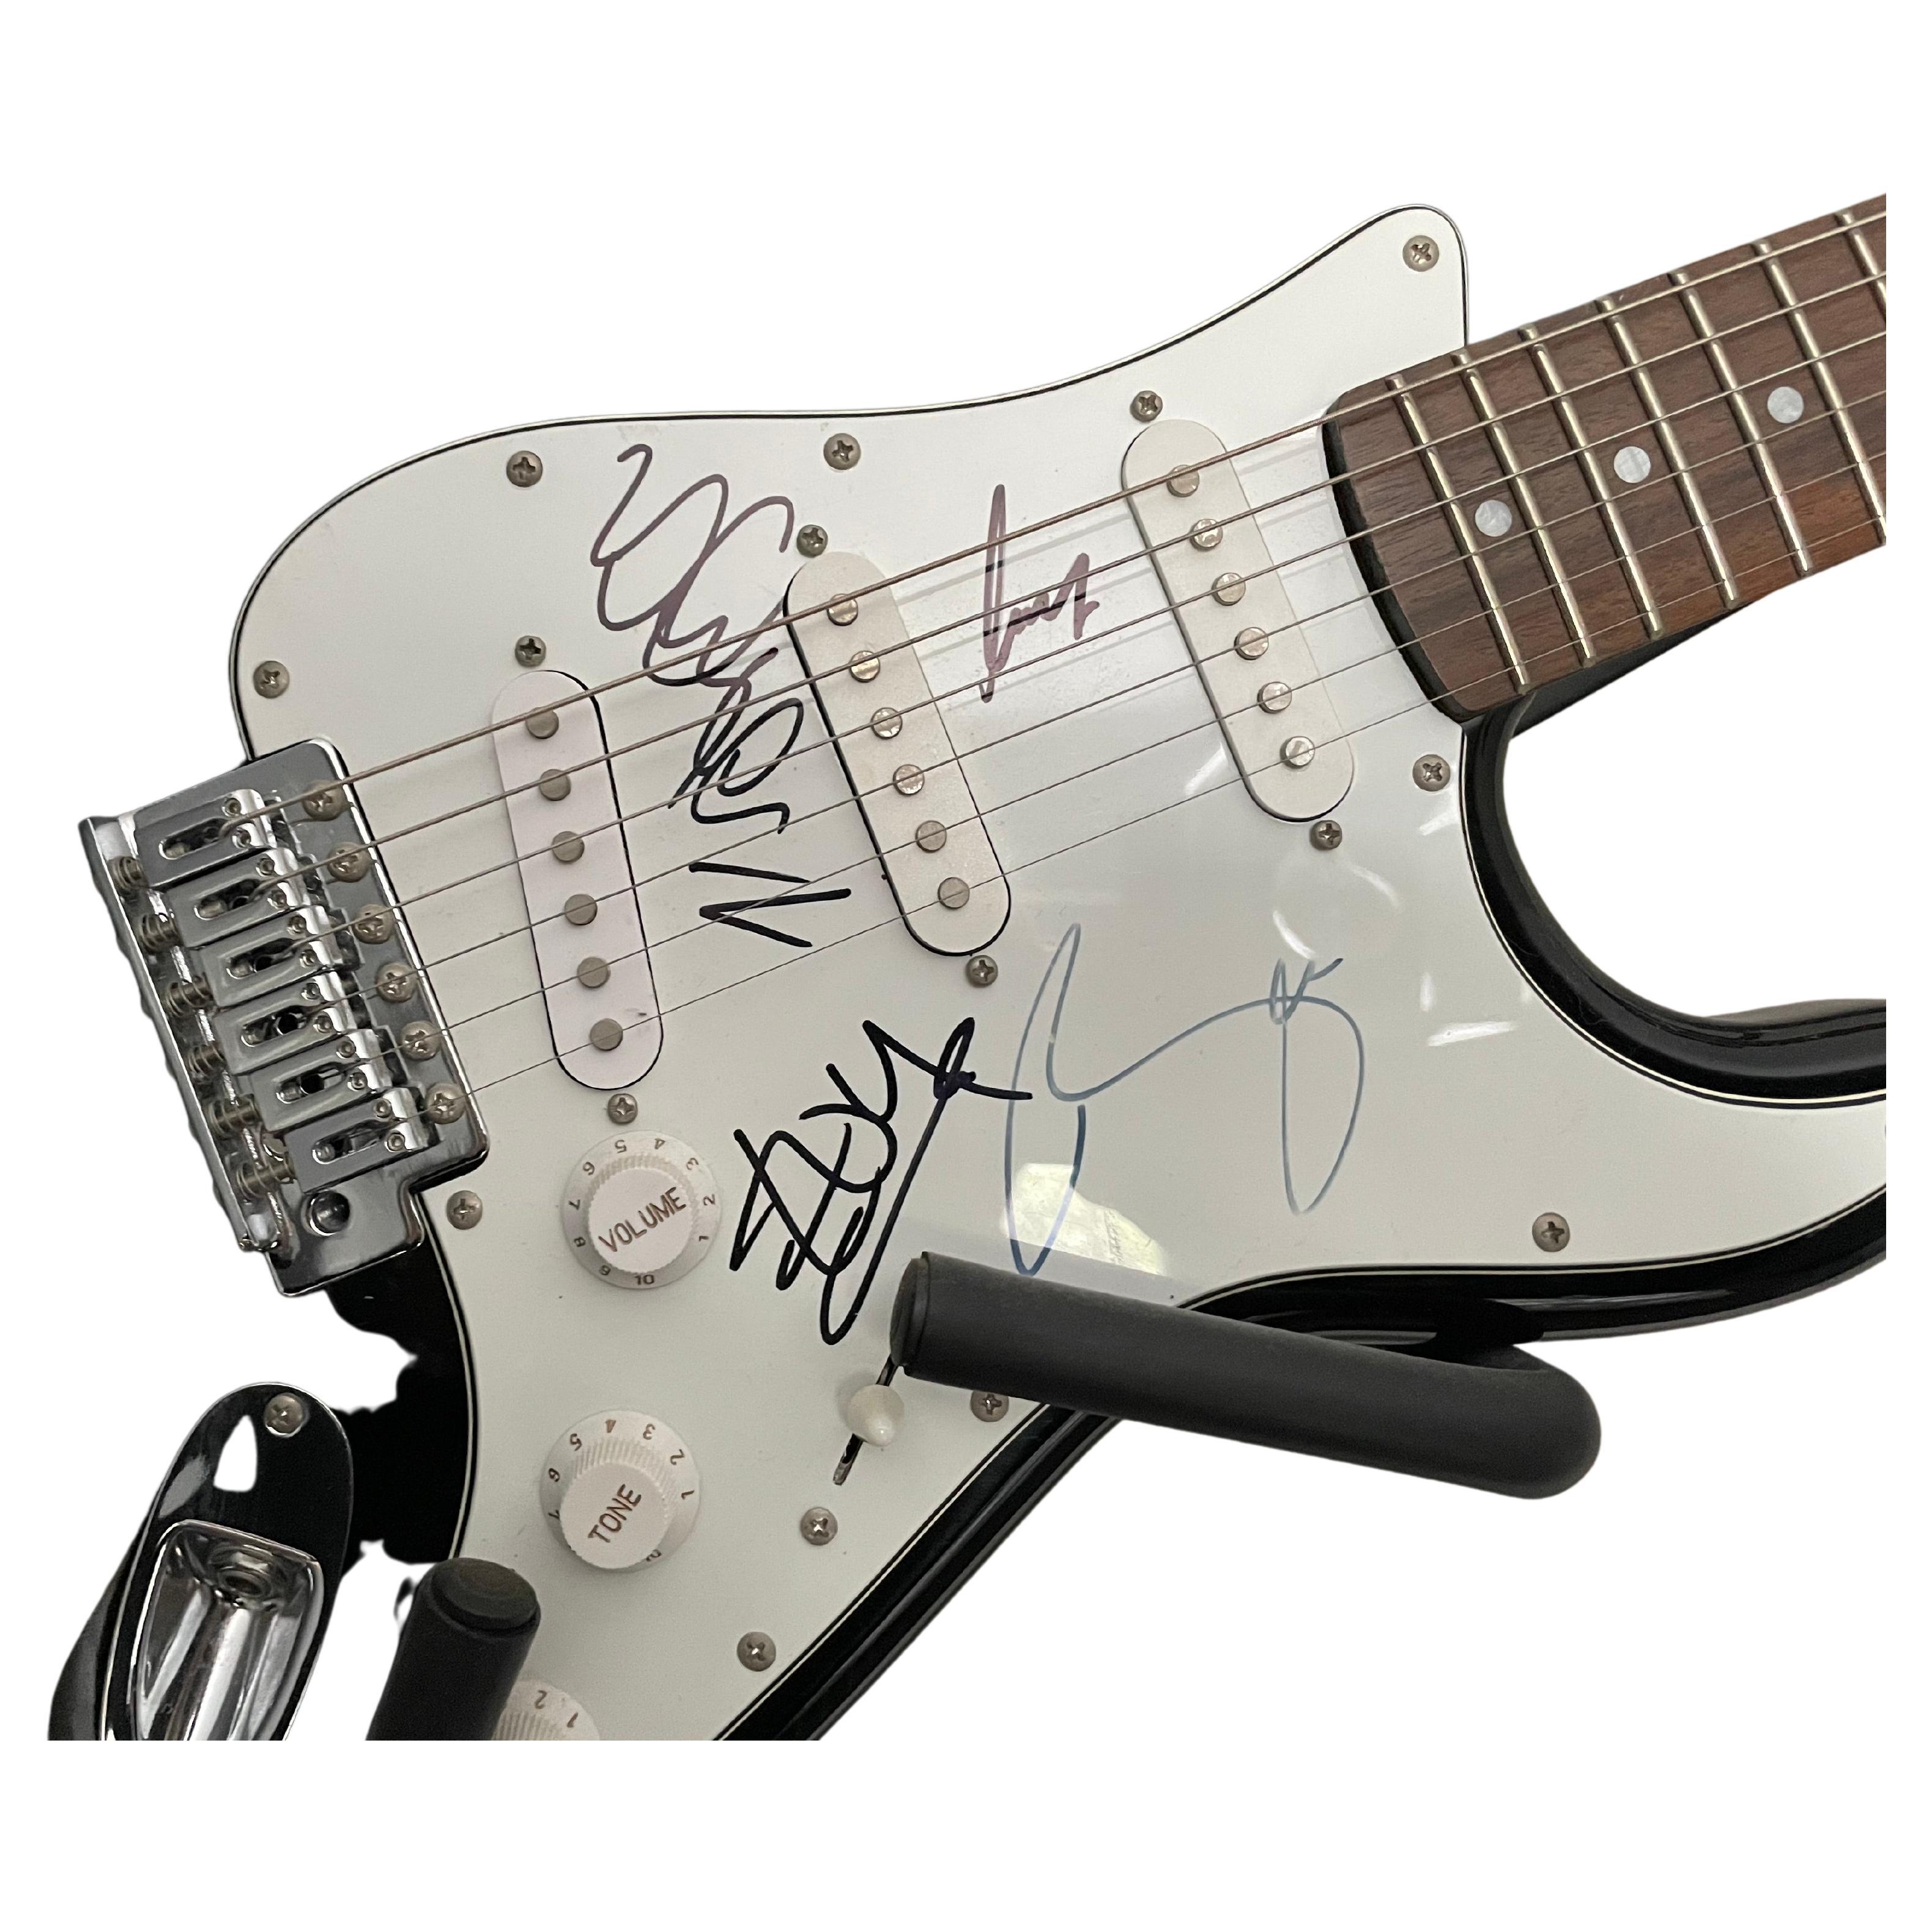 U2 Signed Guitar with Photo Provenance For Sale